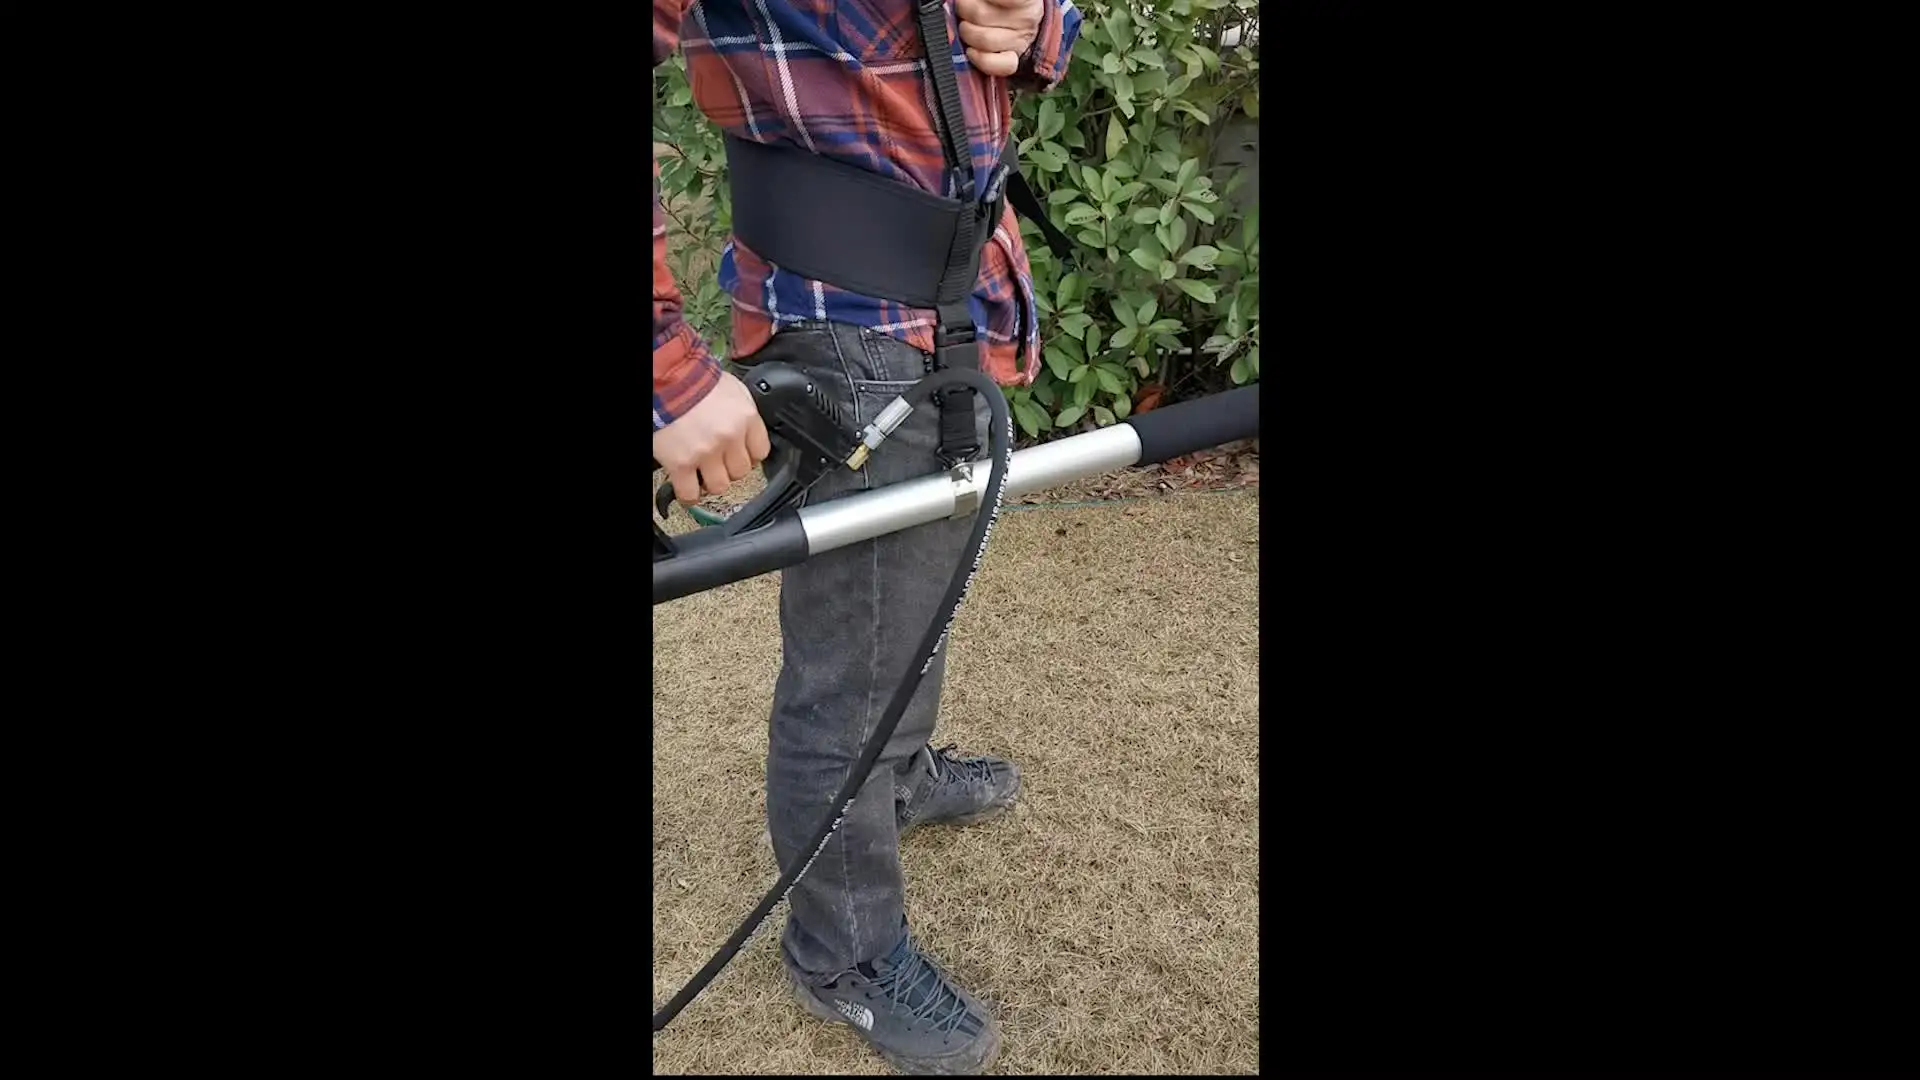 pressure washer extension wand